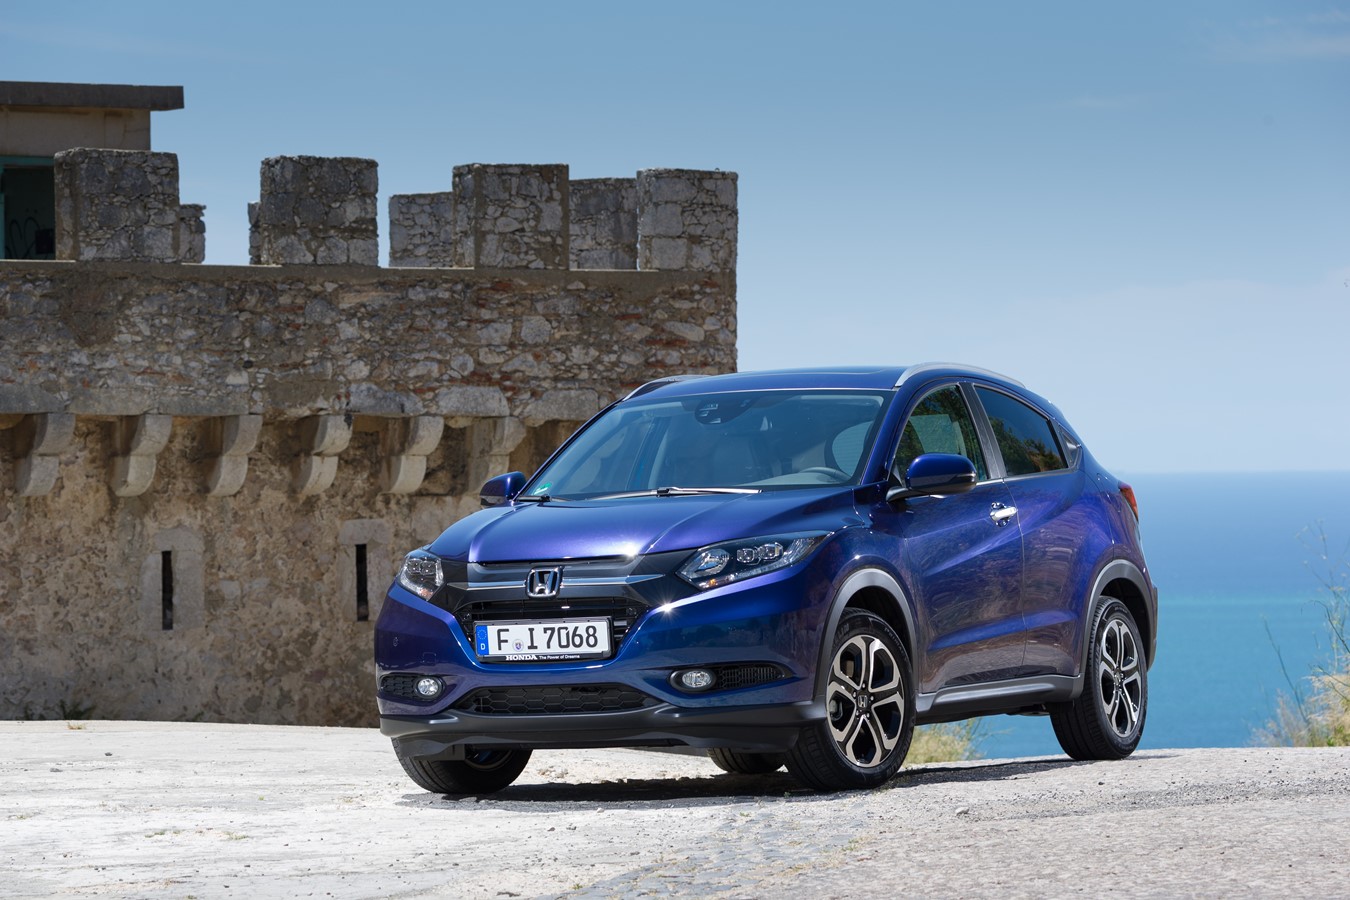 New HR-V and Jazz latest Honda models to receive 5-star Euro NCAP Overall Safety Rating